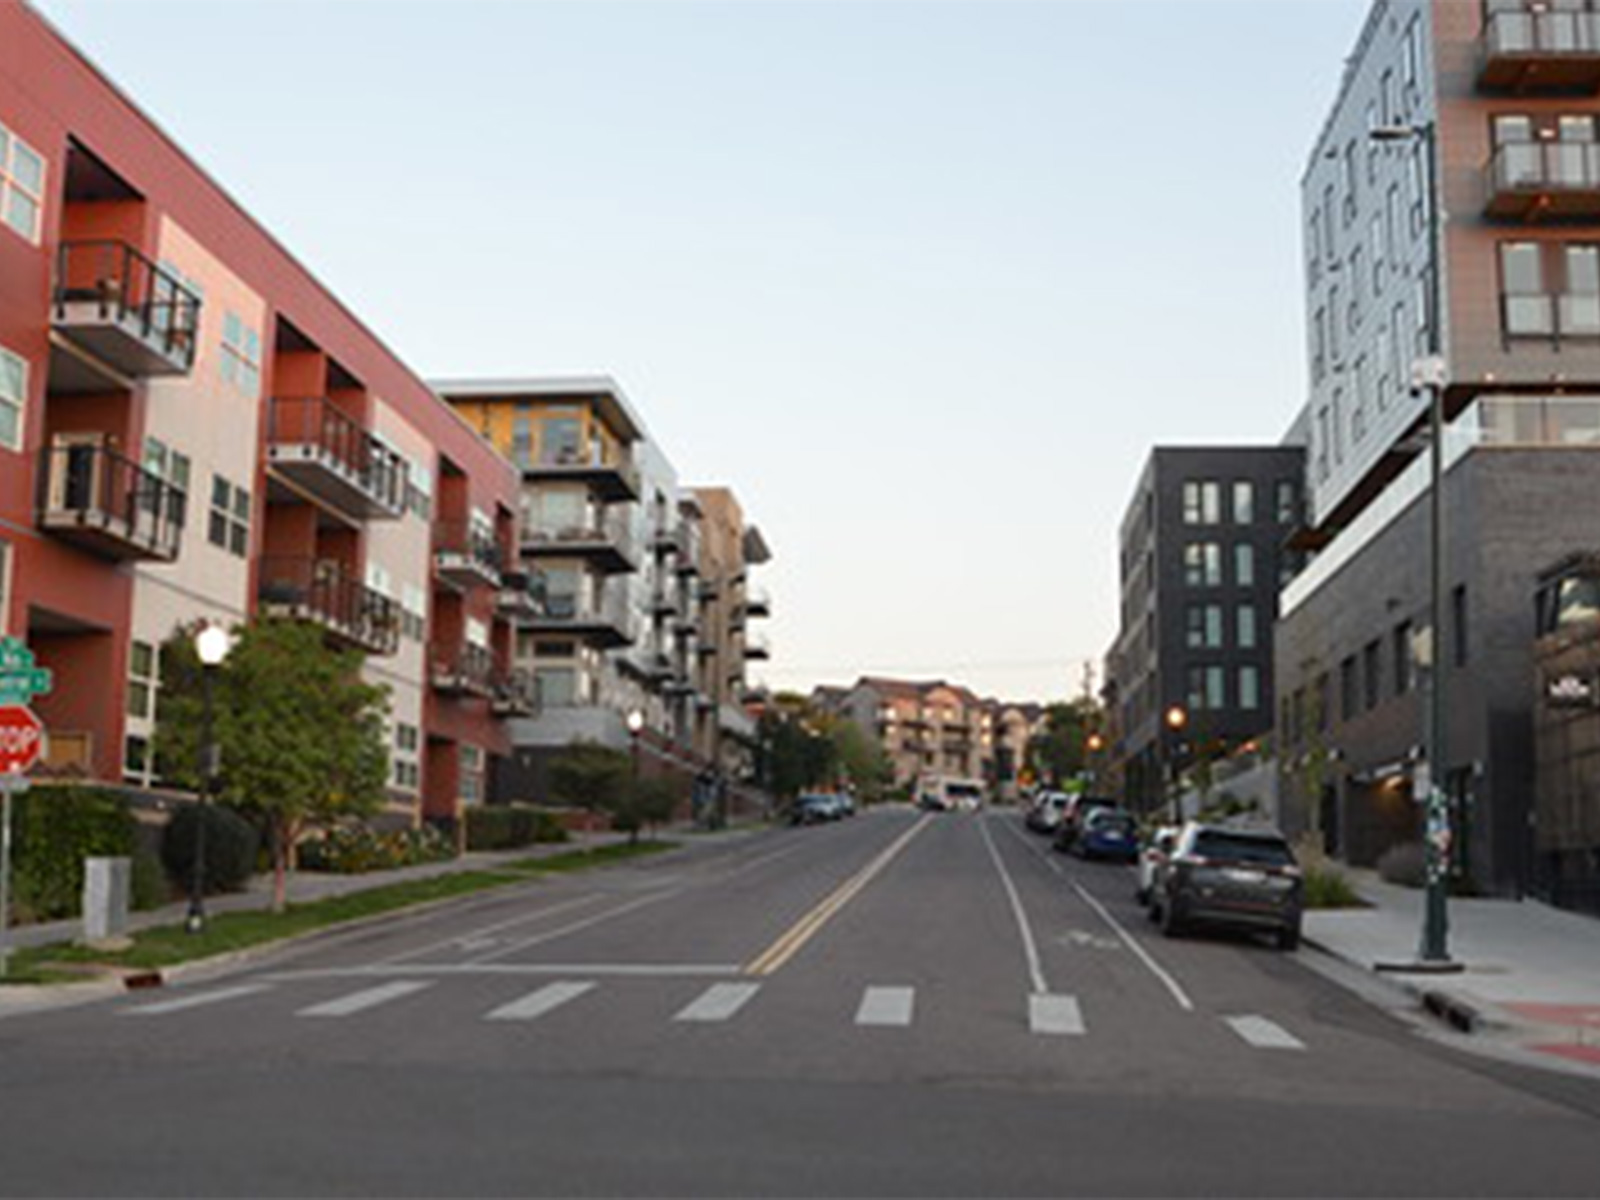 An urban setting in Colorado with residential and commercial buildings lining a street.